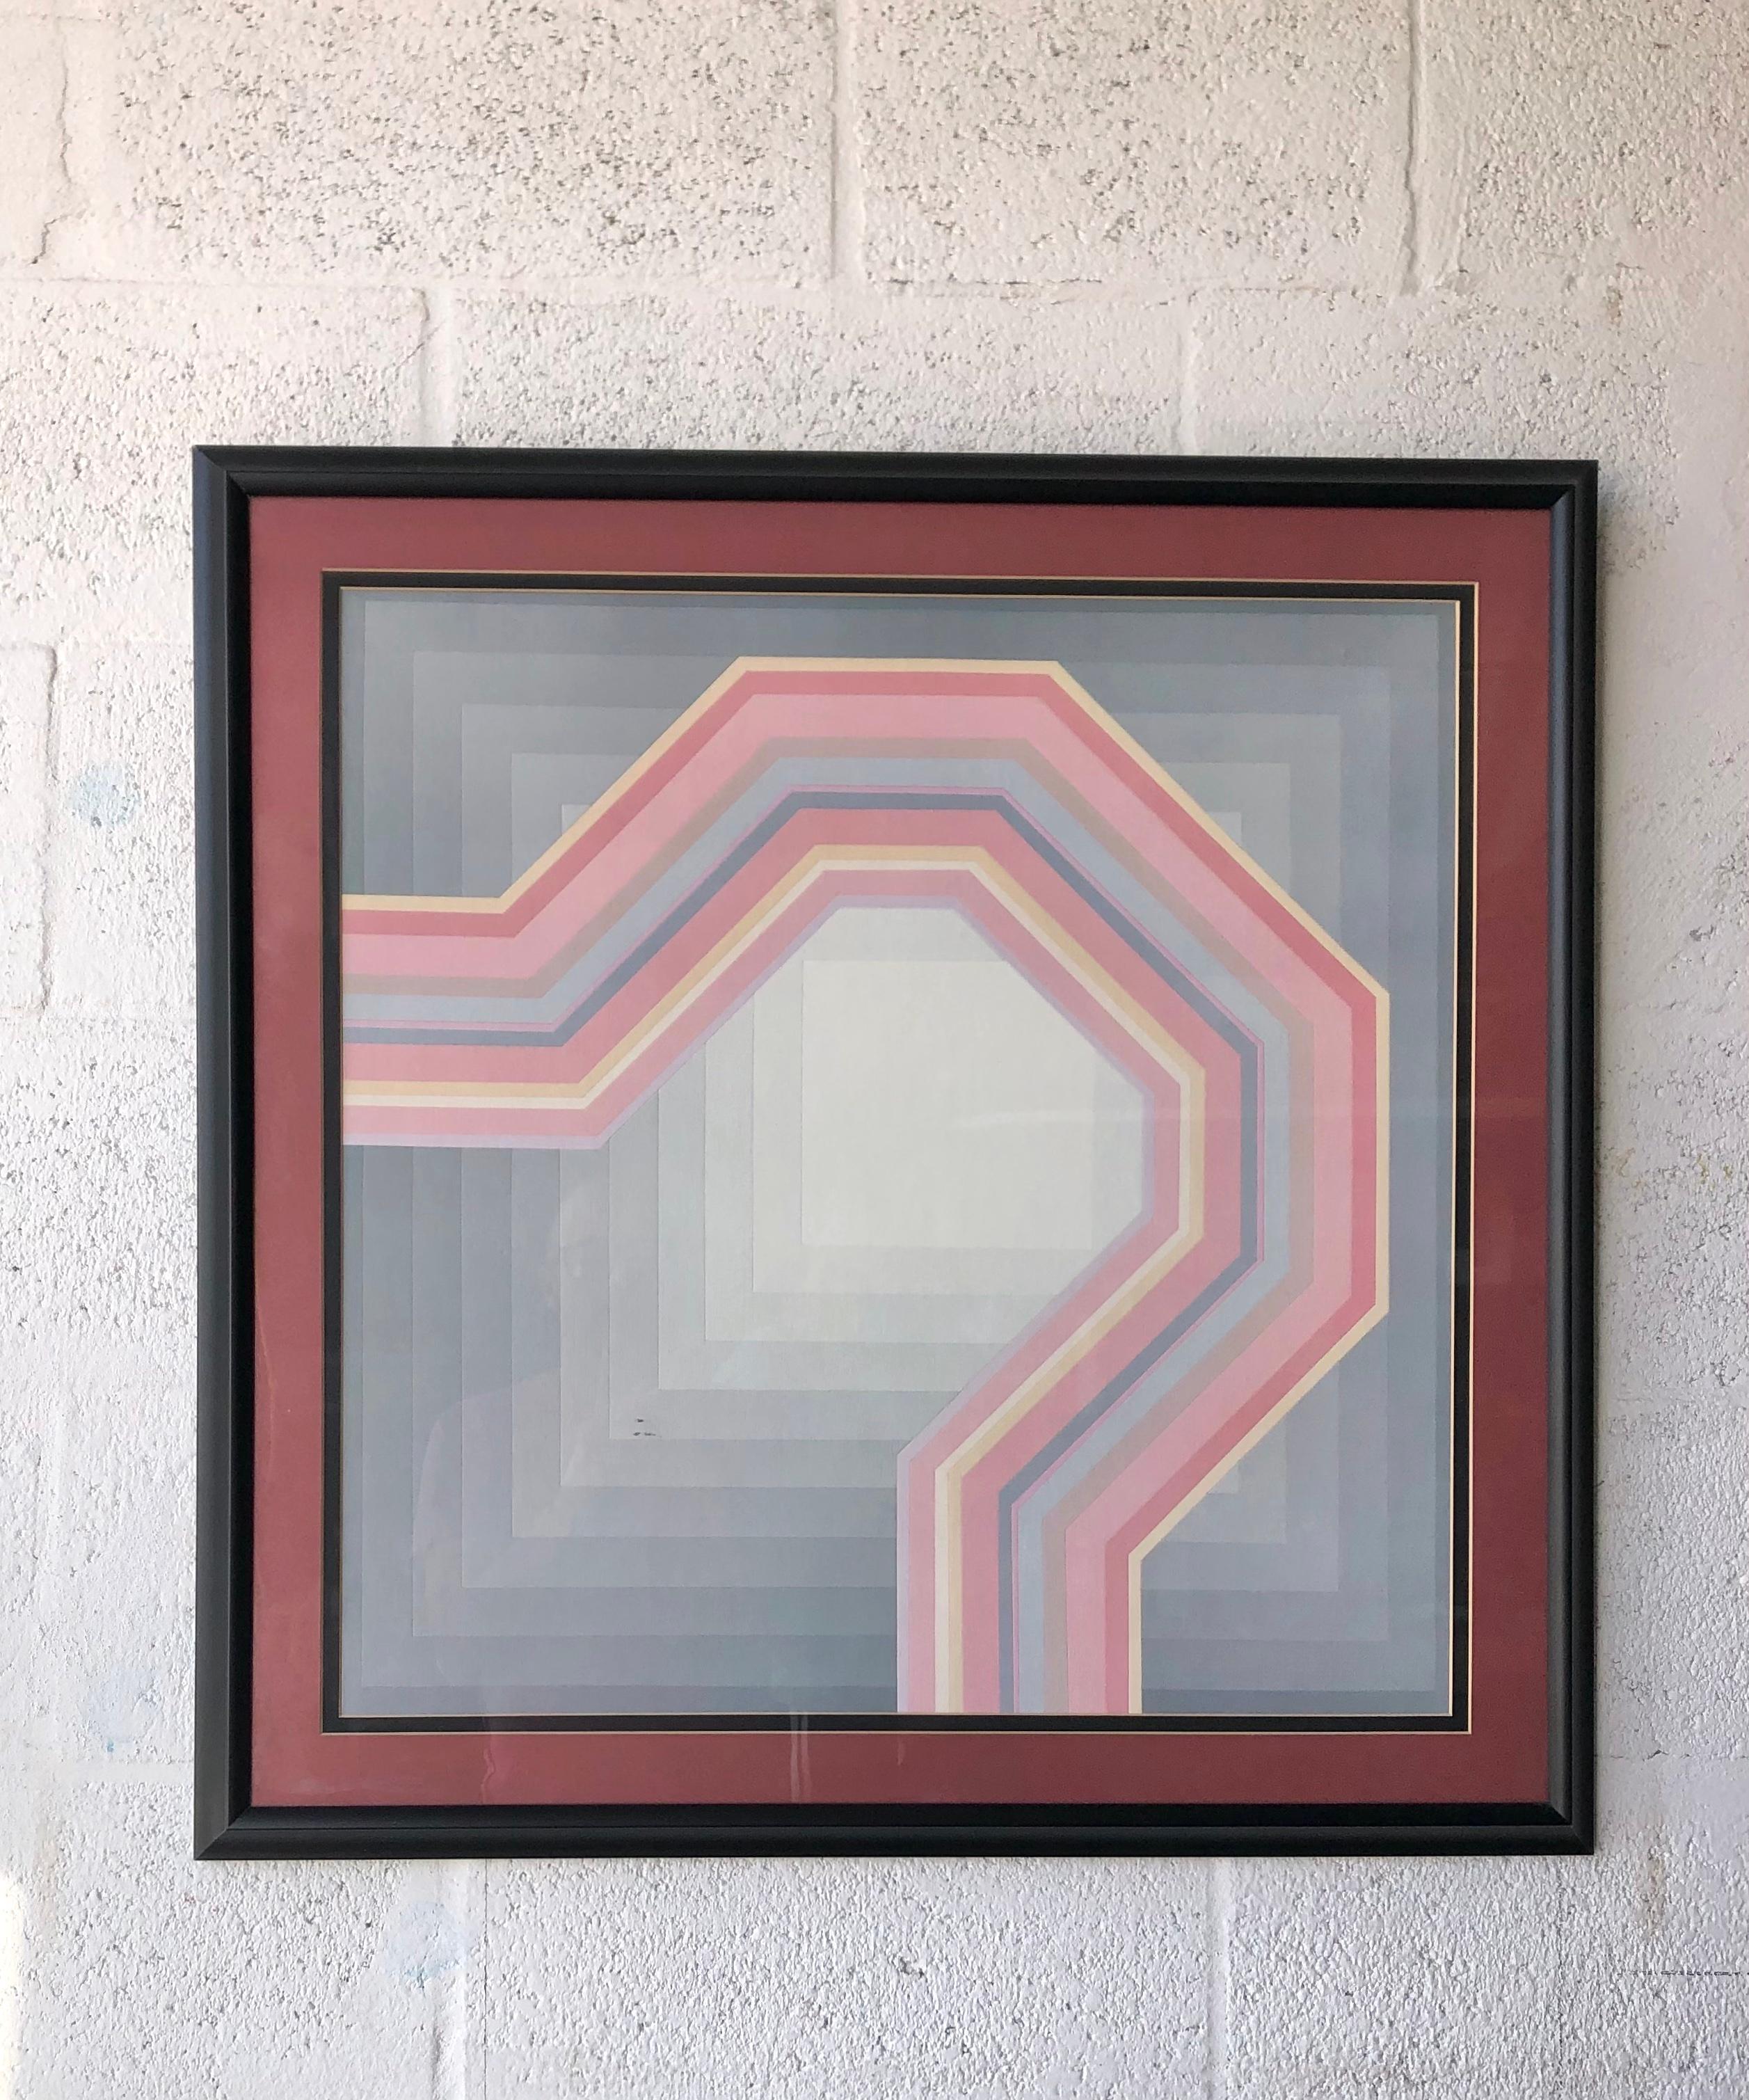 Post-Modern Framed Geometric Op Art Lithograph in the Richard Anuszkiewicz's Style. C 1980s For Sale